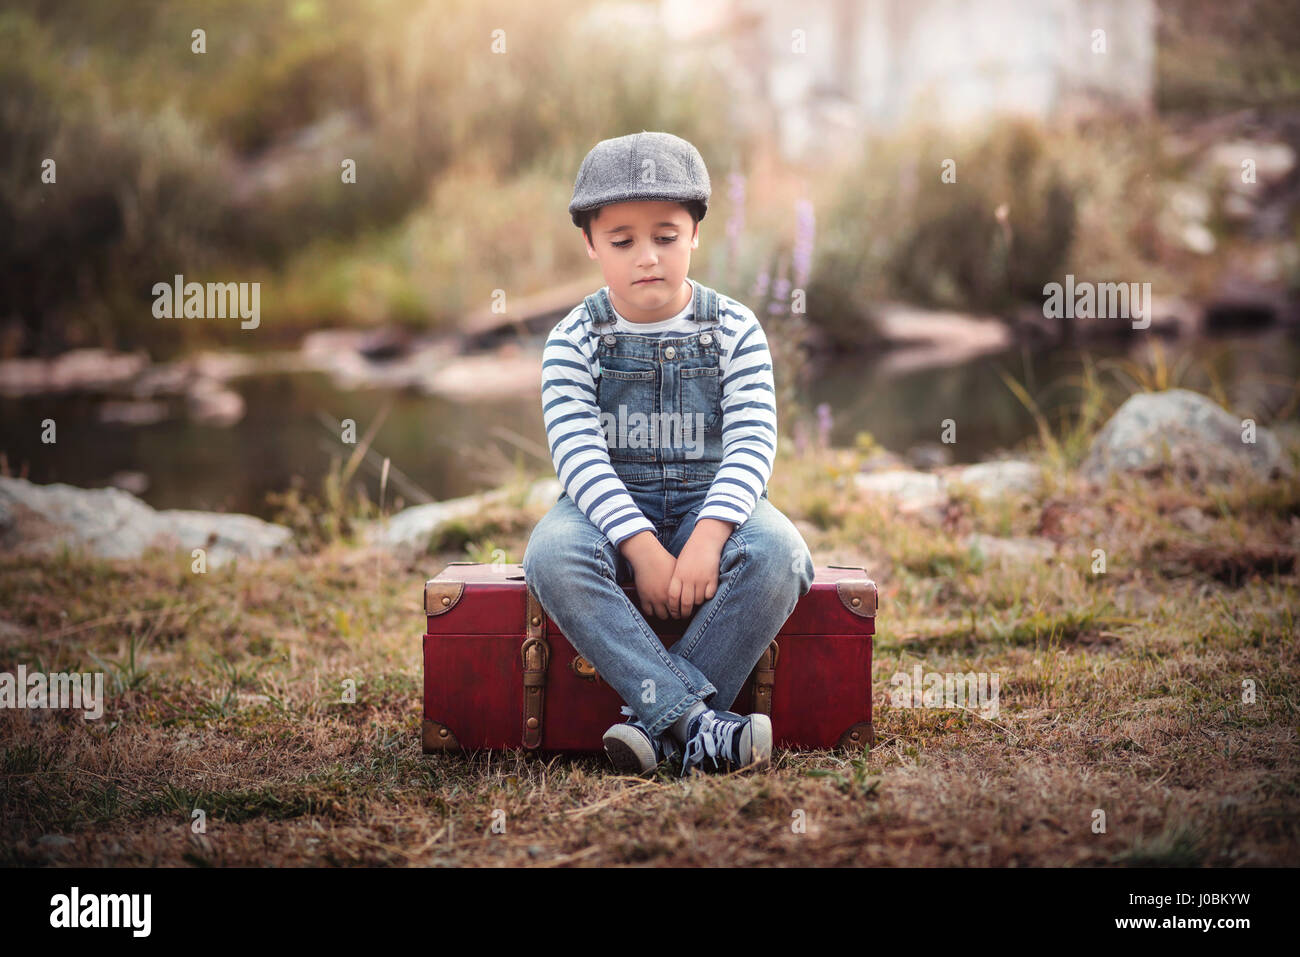 Sad child sitting in a suitcase Stock Photo